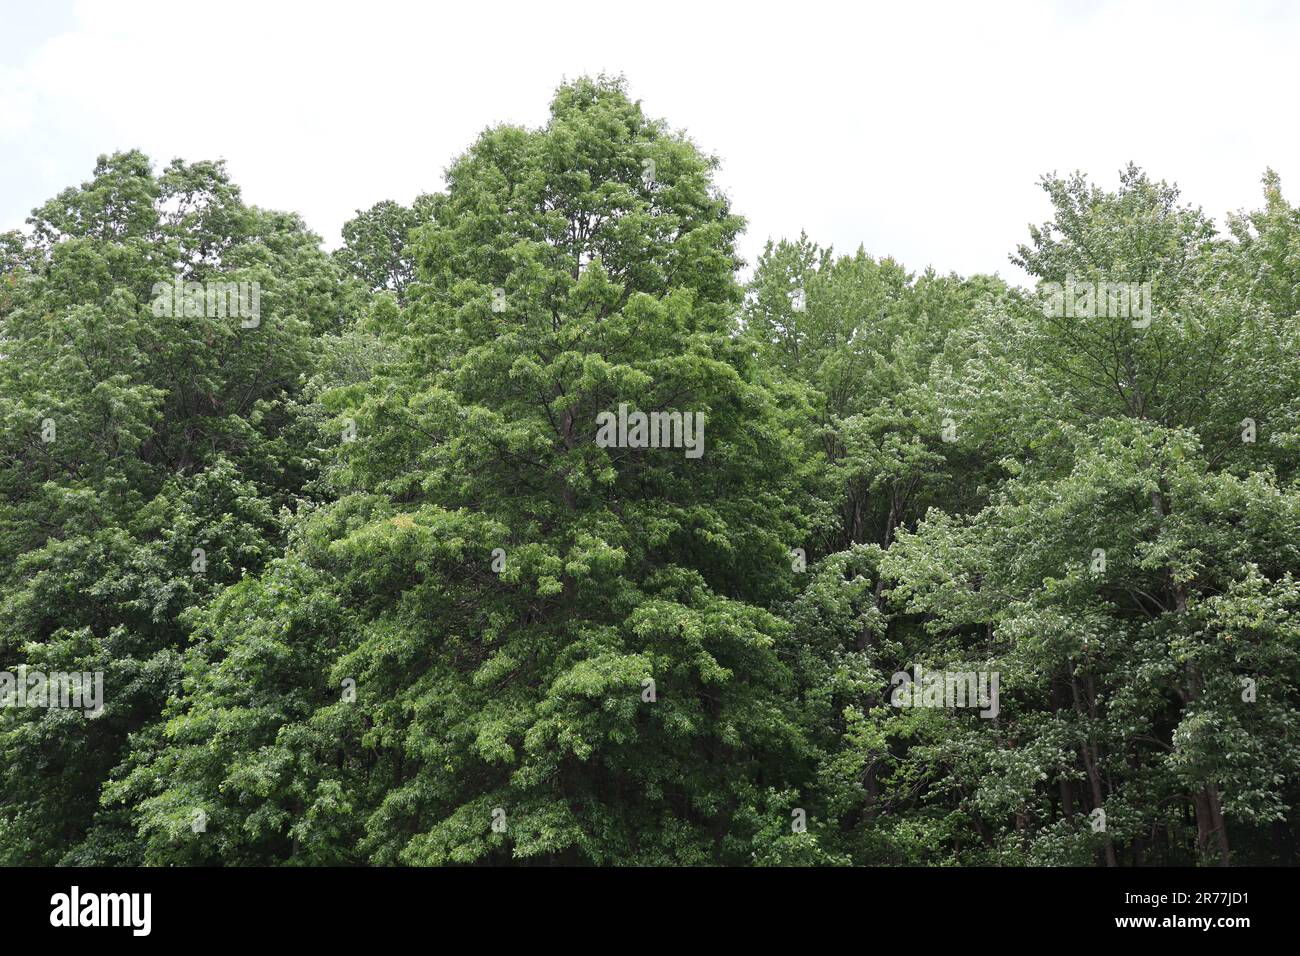 Multiple tall green leafy trees Stock Photo